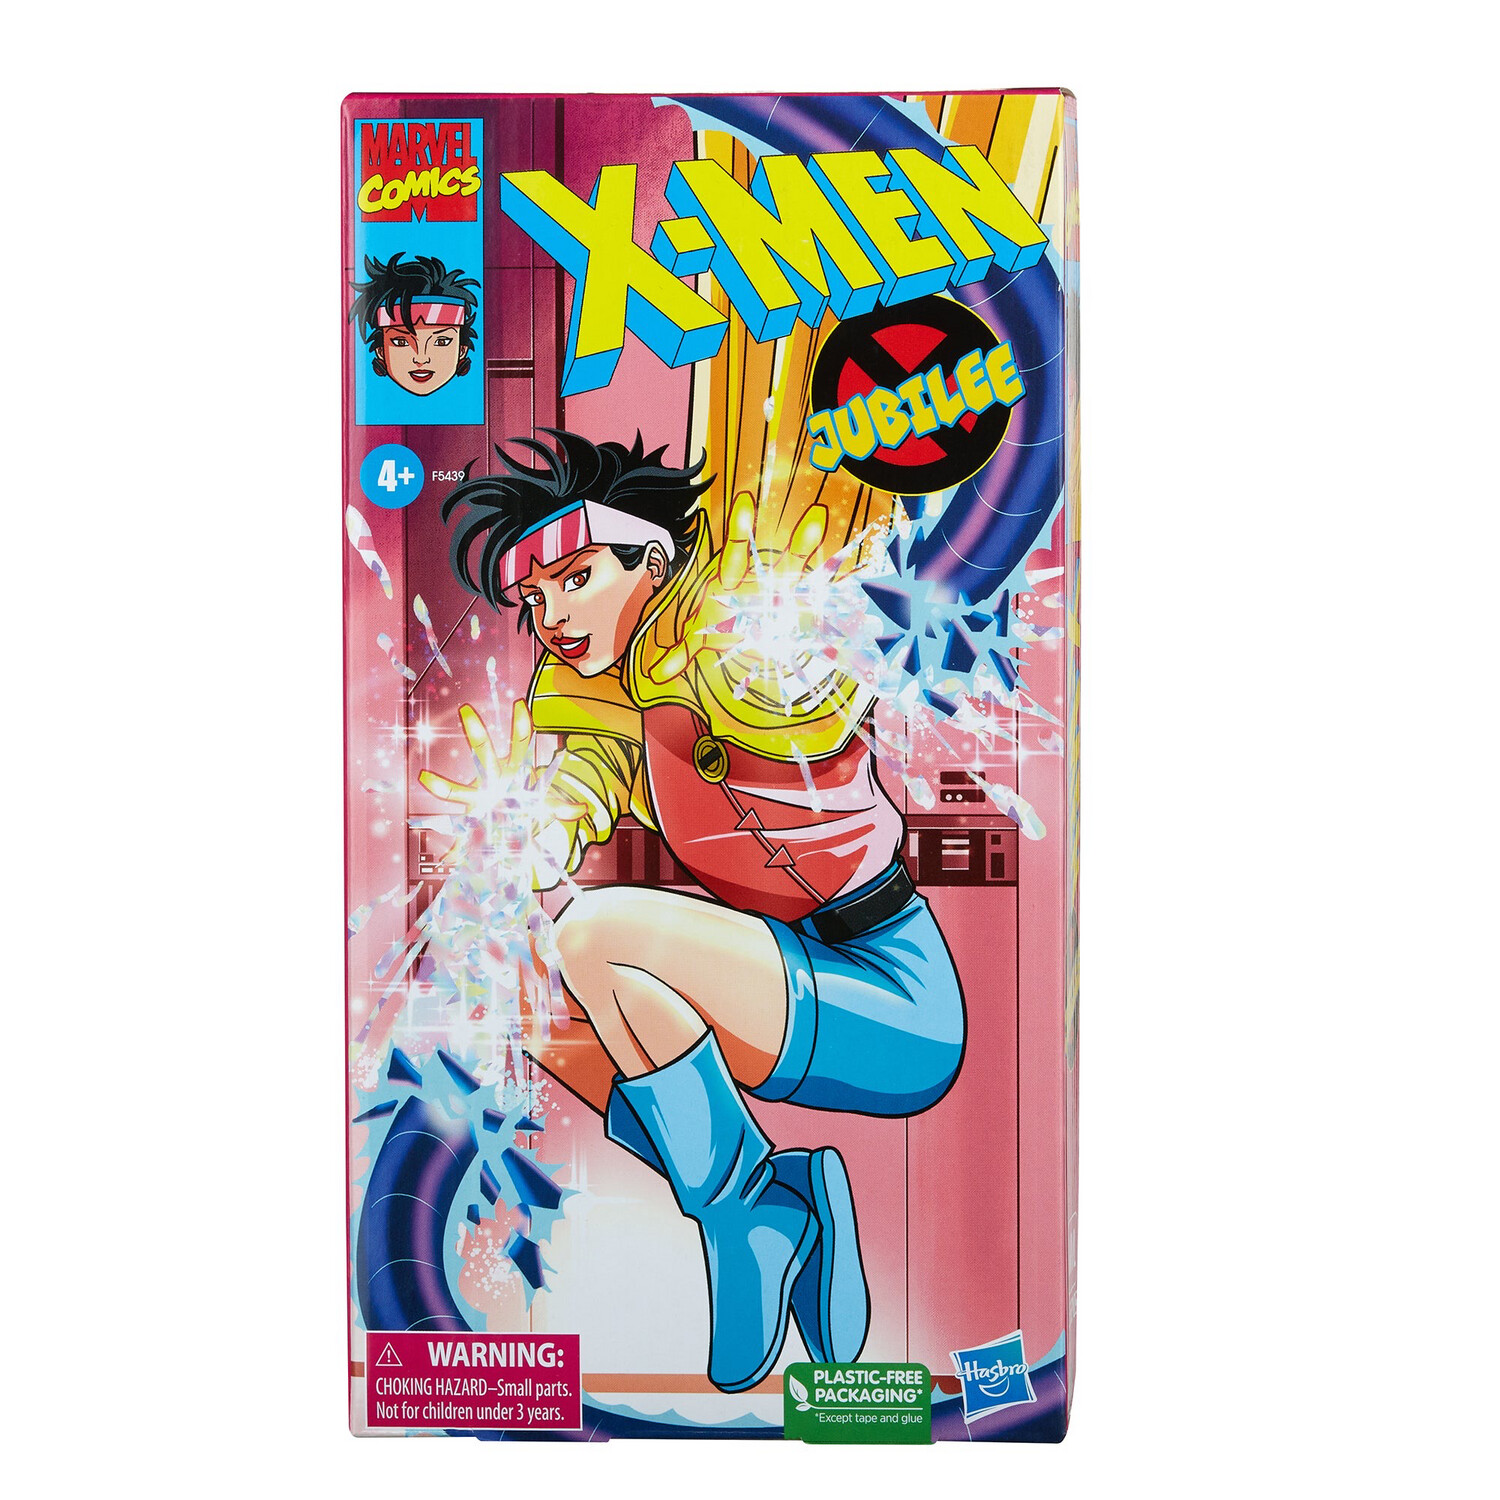 Marvel Legends 6″ jubilee vhs packaging exclusive [max 1 per person]